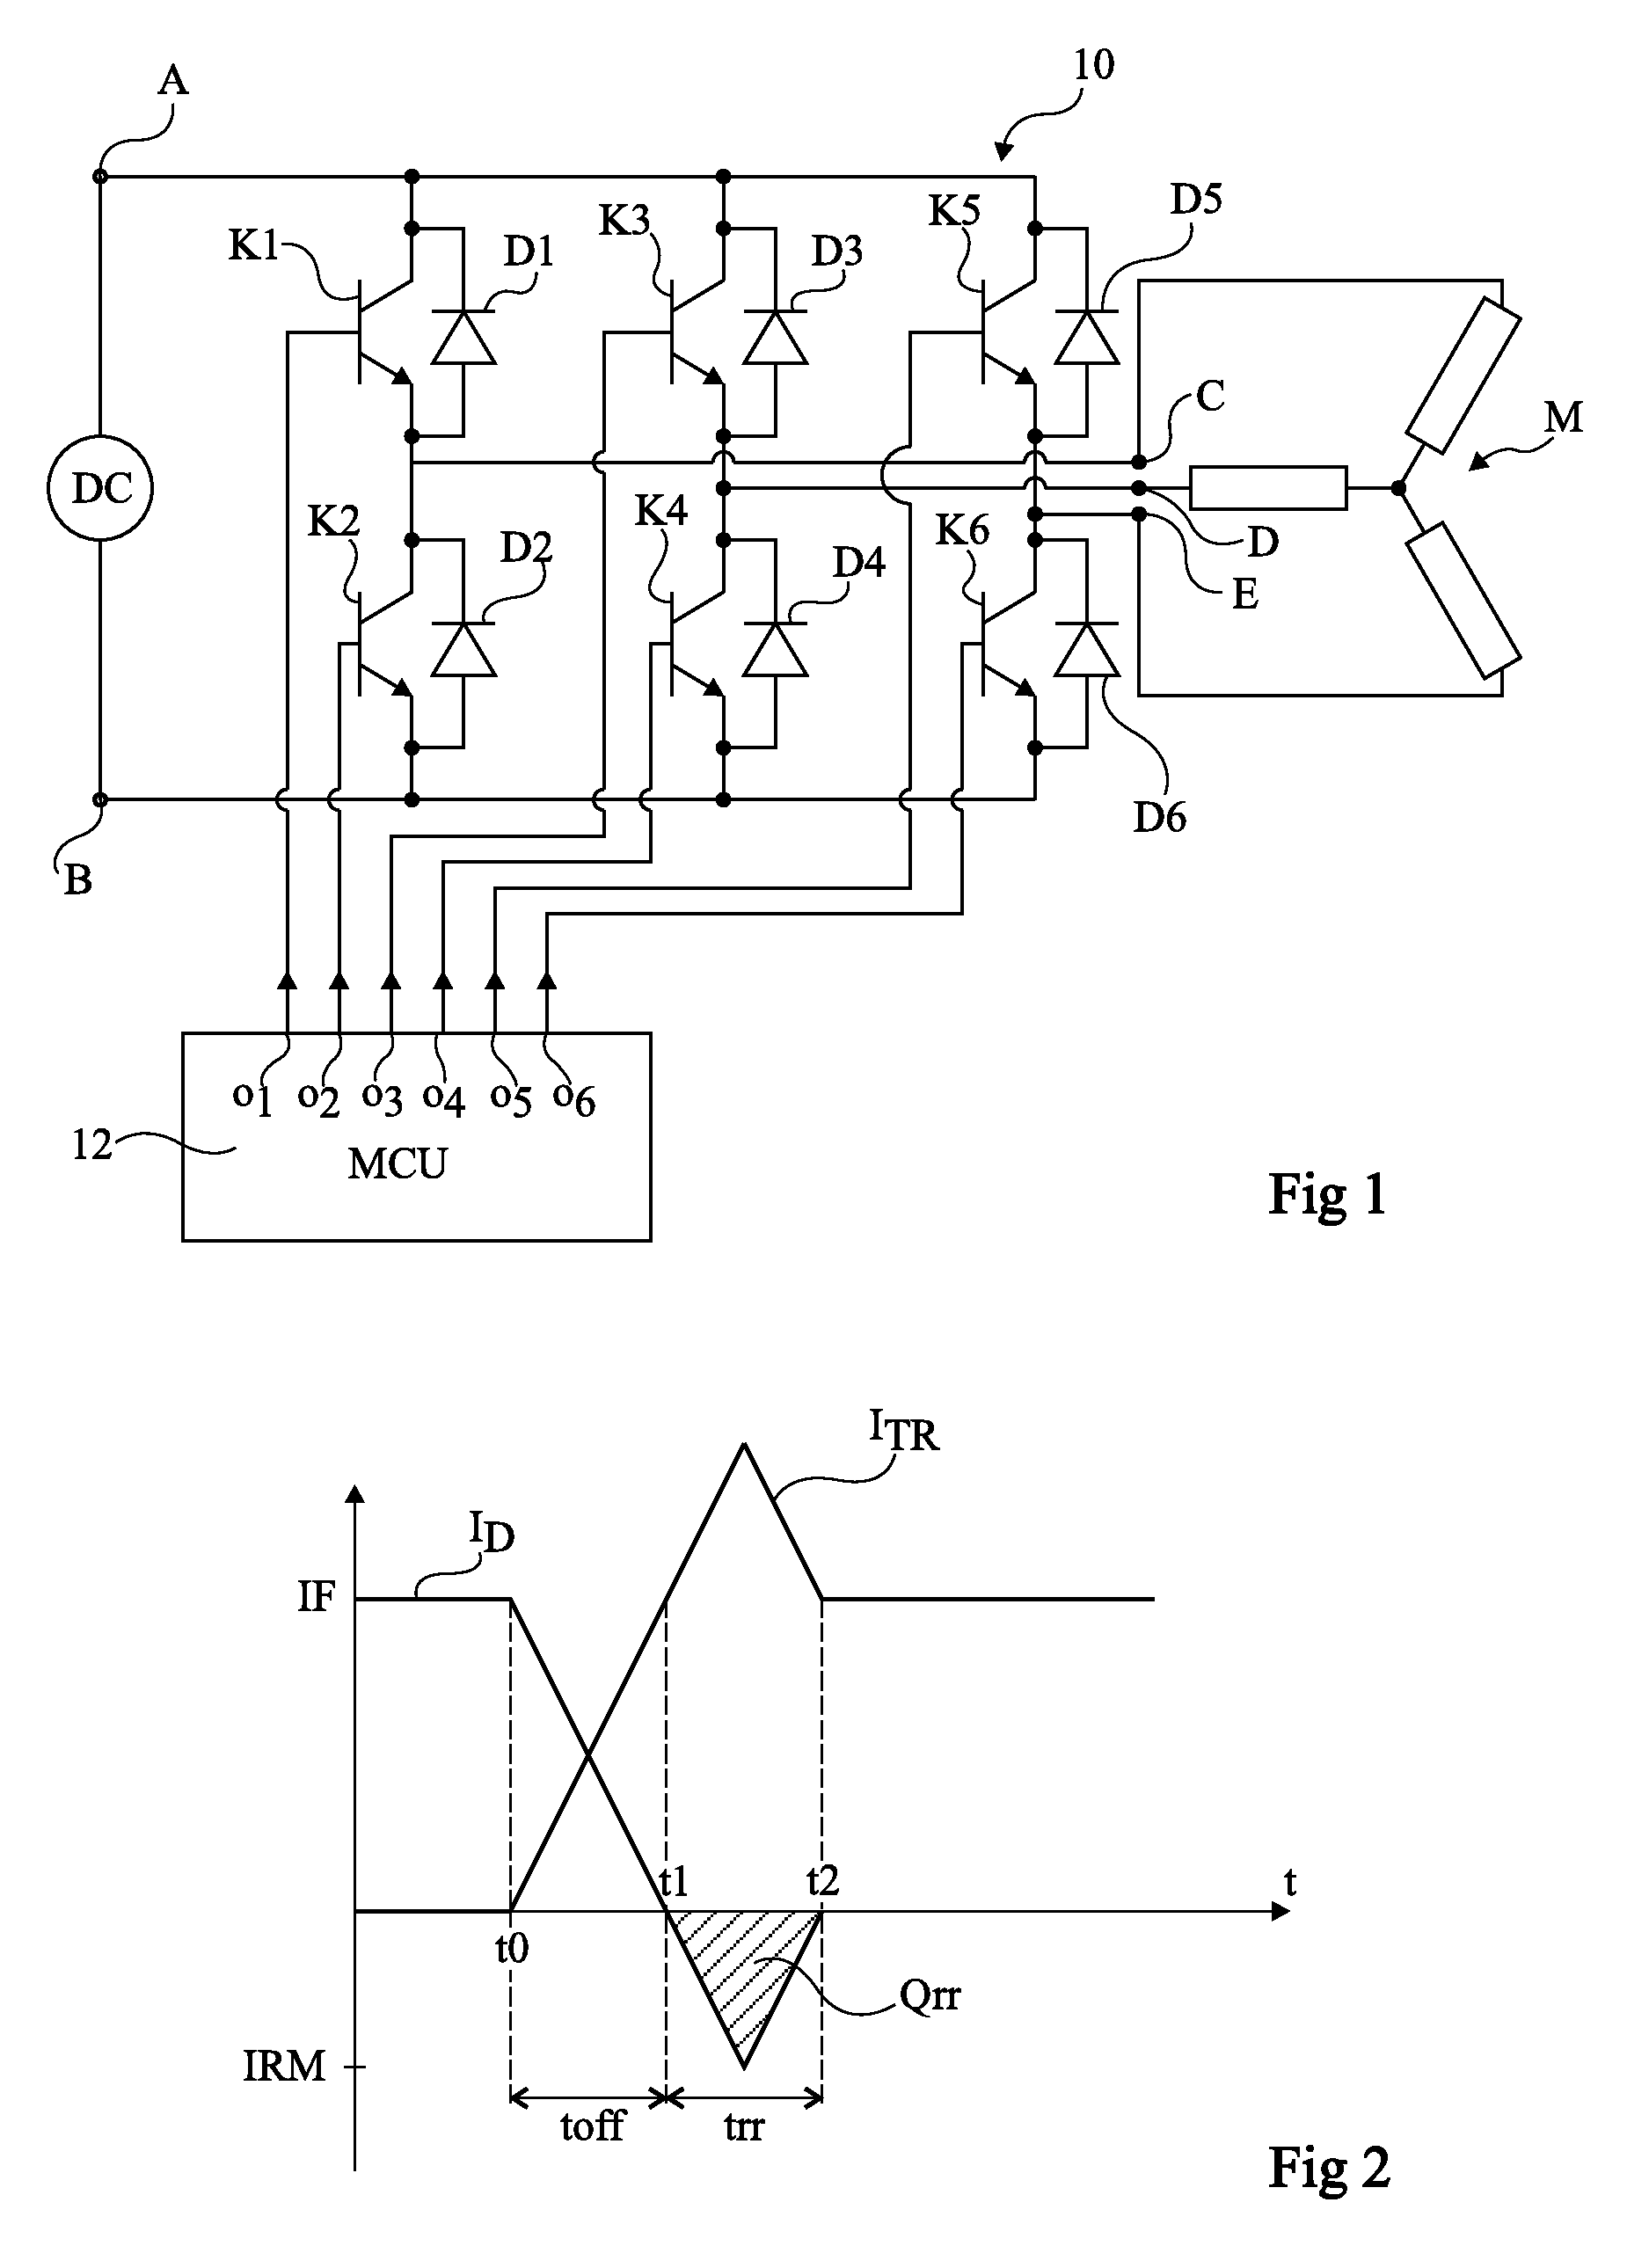 Control of a switch in a power converter